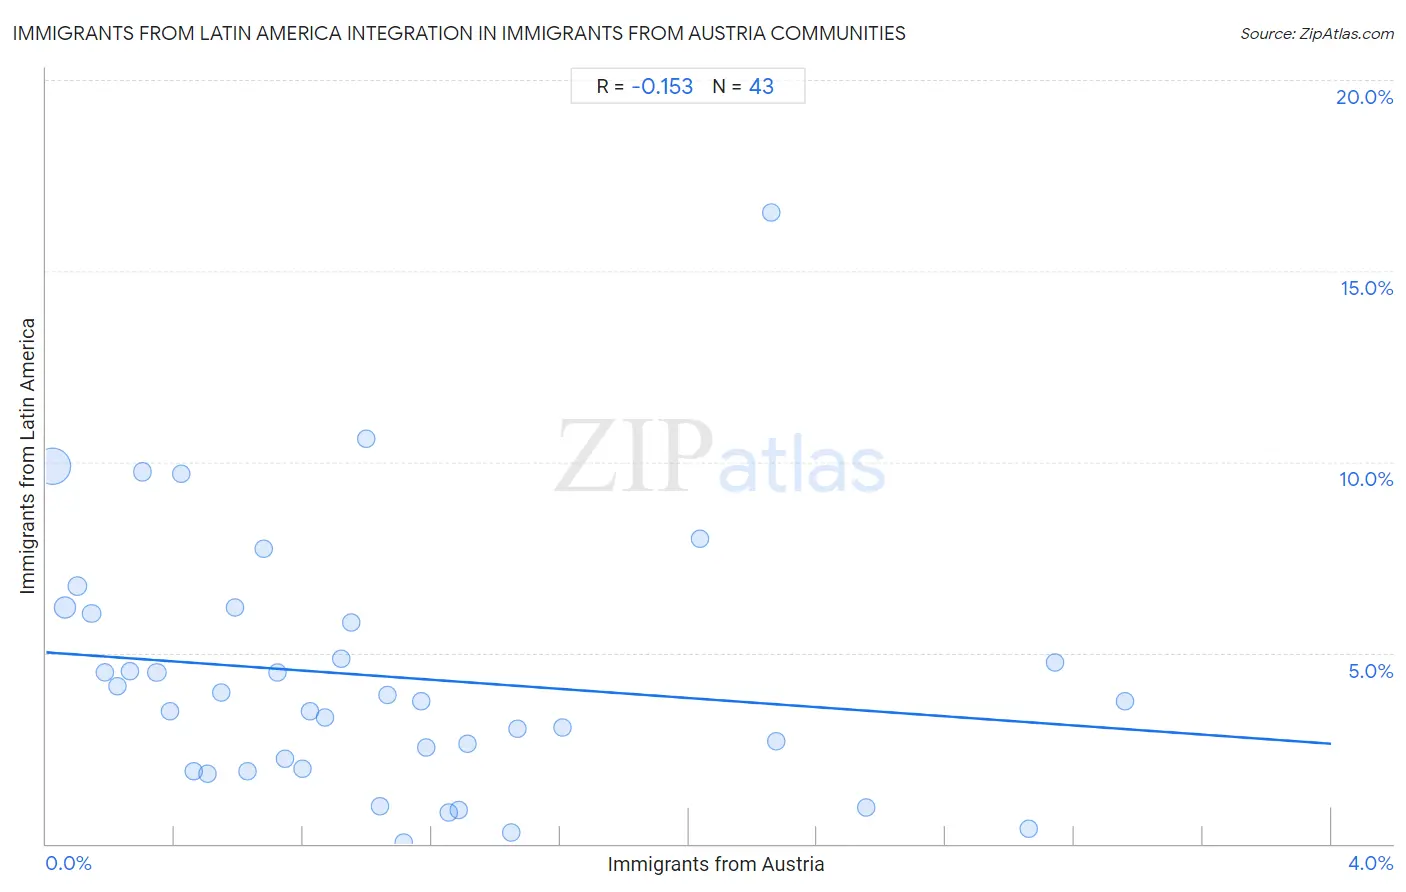 Immigrants from Austria Integration in Immigrants from Latin America Communities